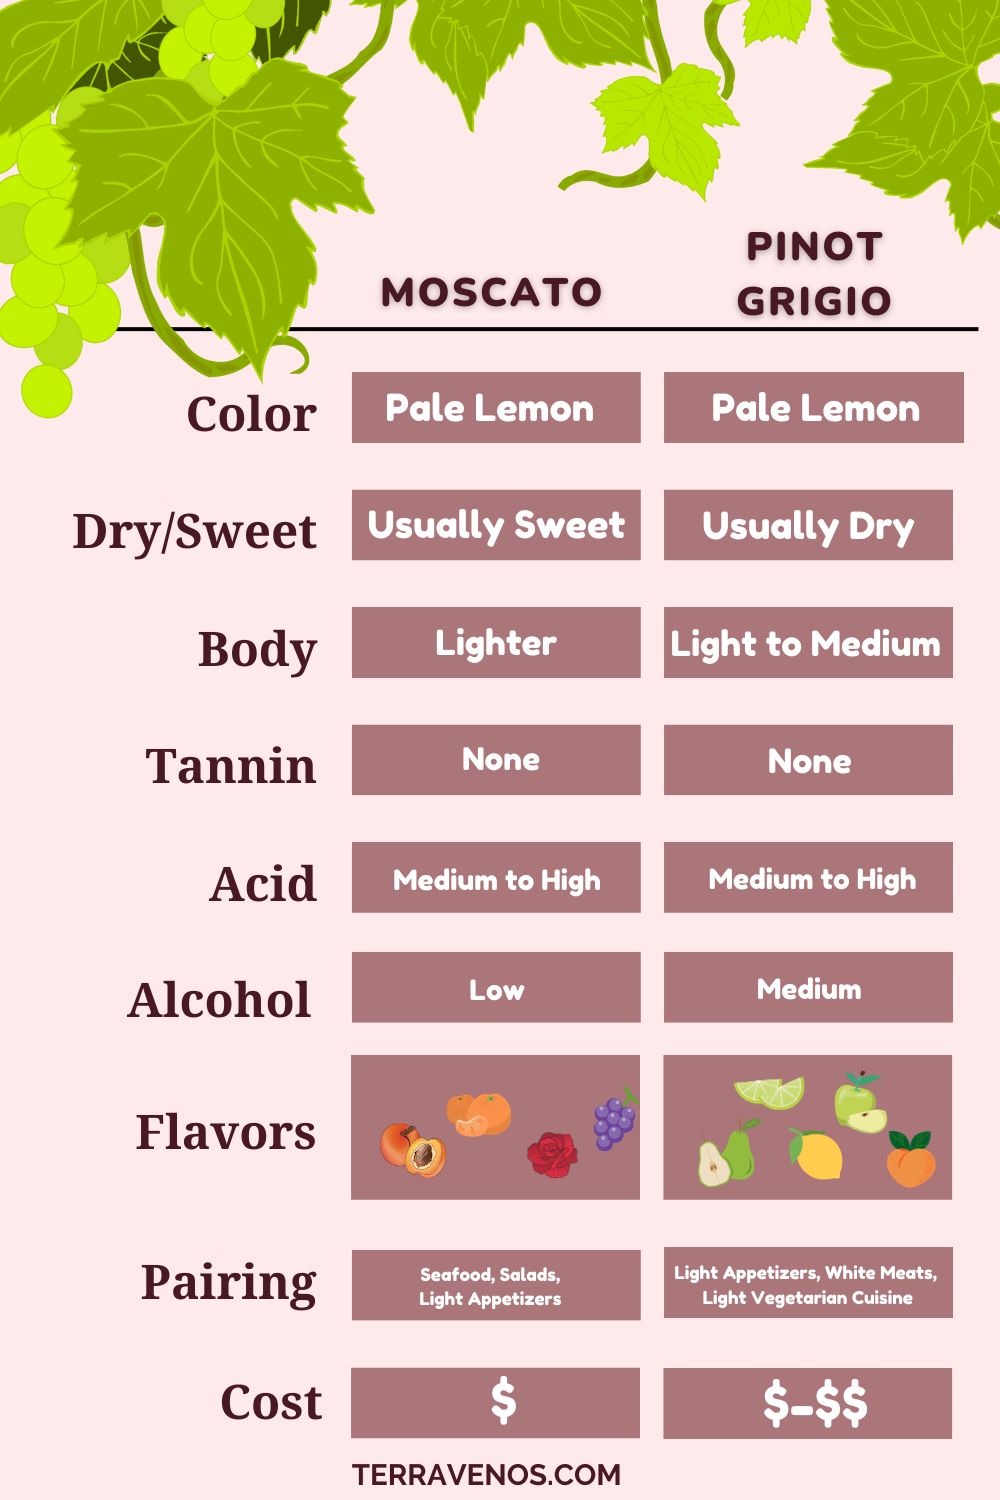 moscato-vs-pinot-grigio-comparison-side-by-side-infographic